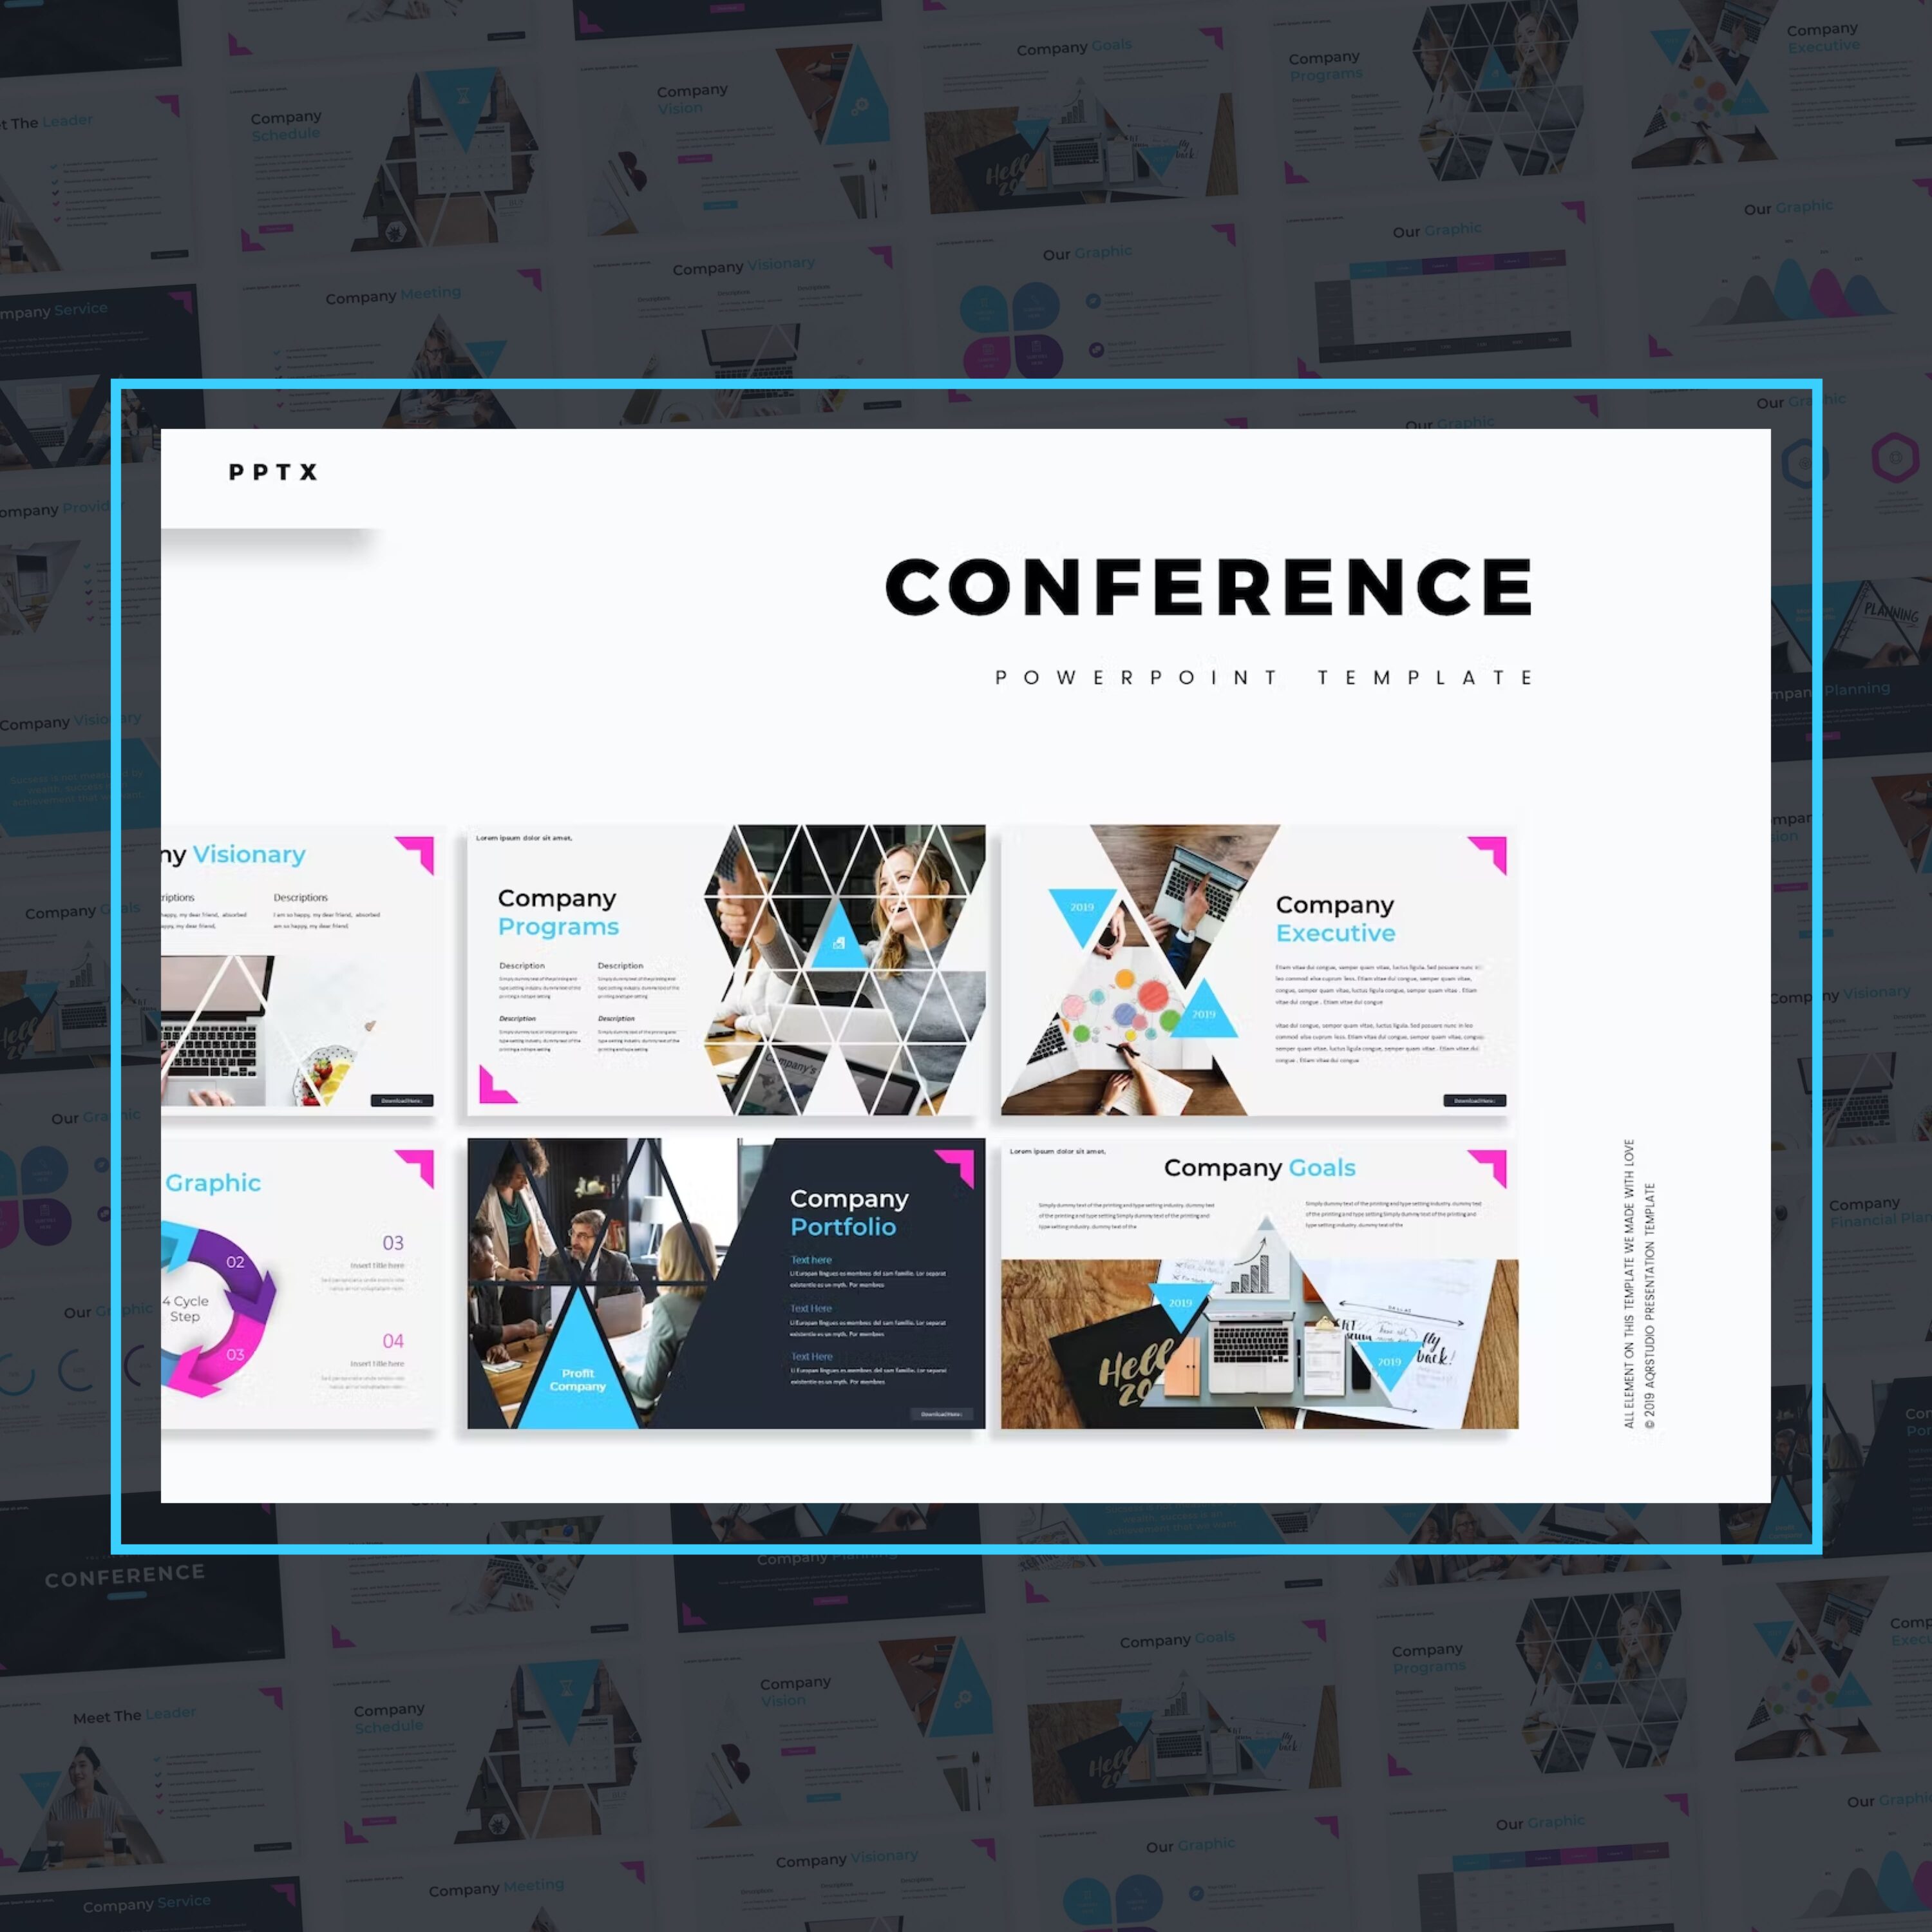 Conference powerpoint template illustration.